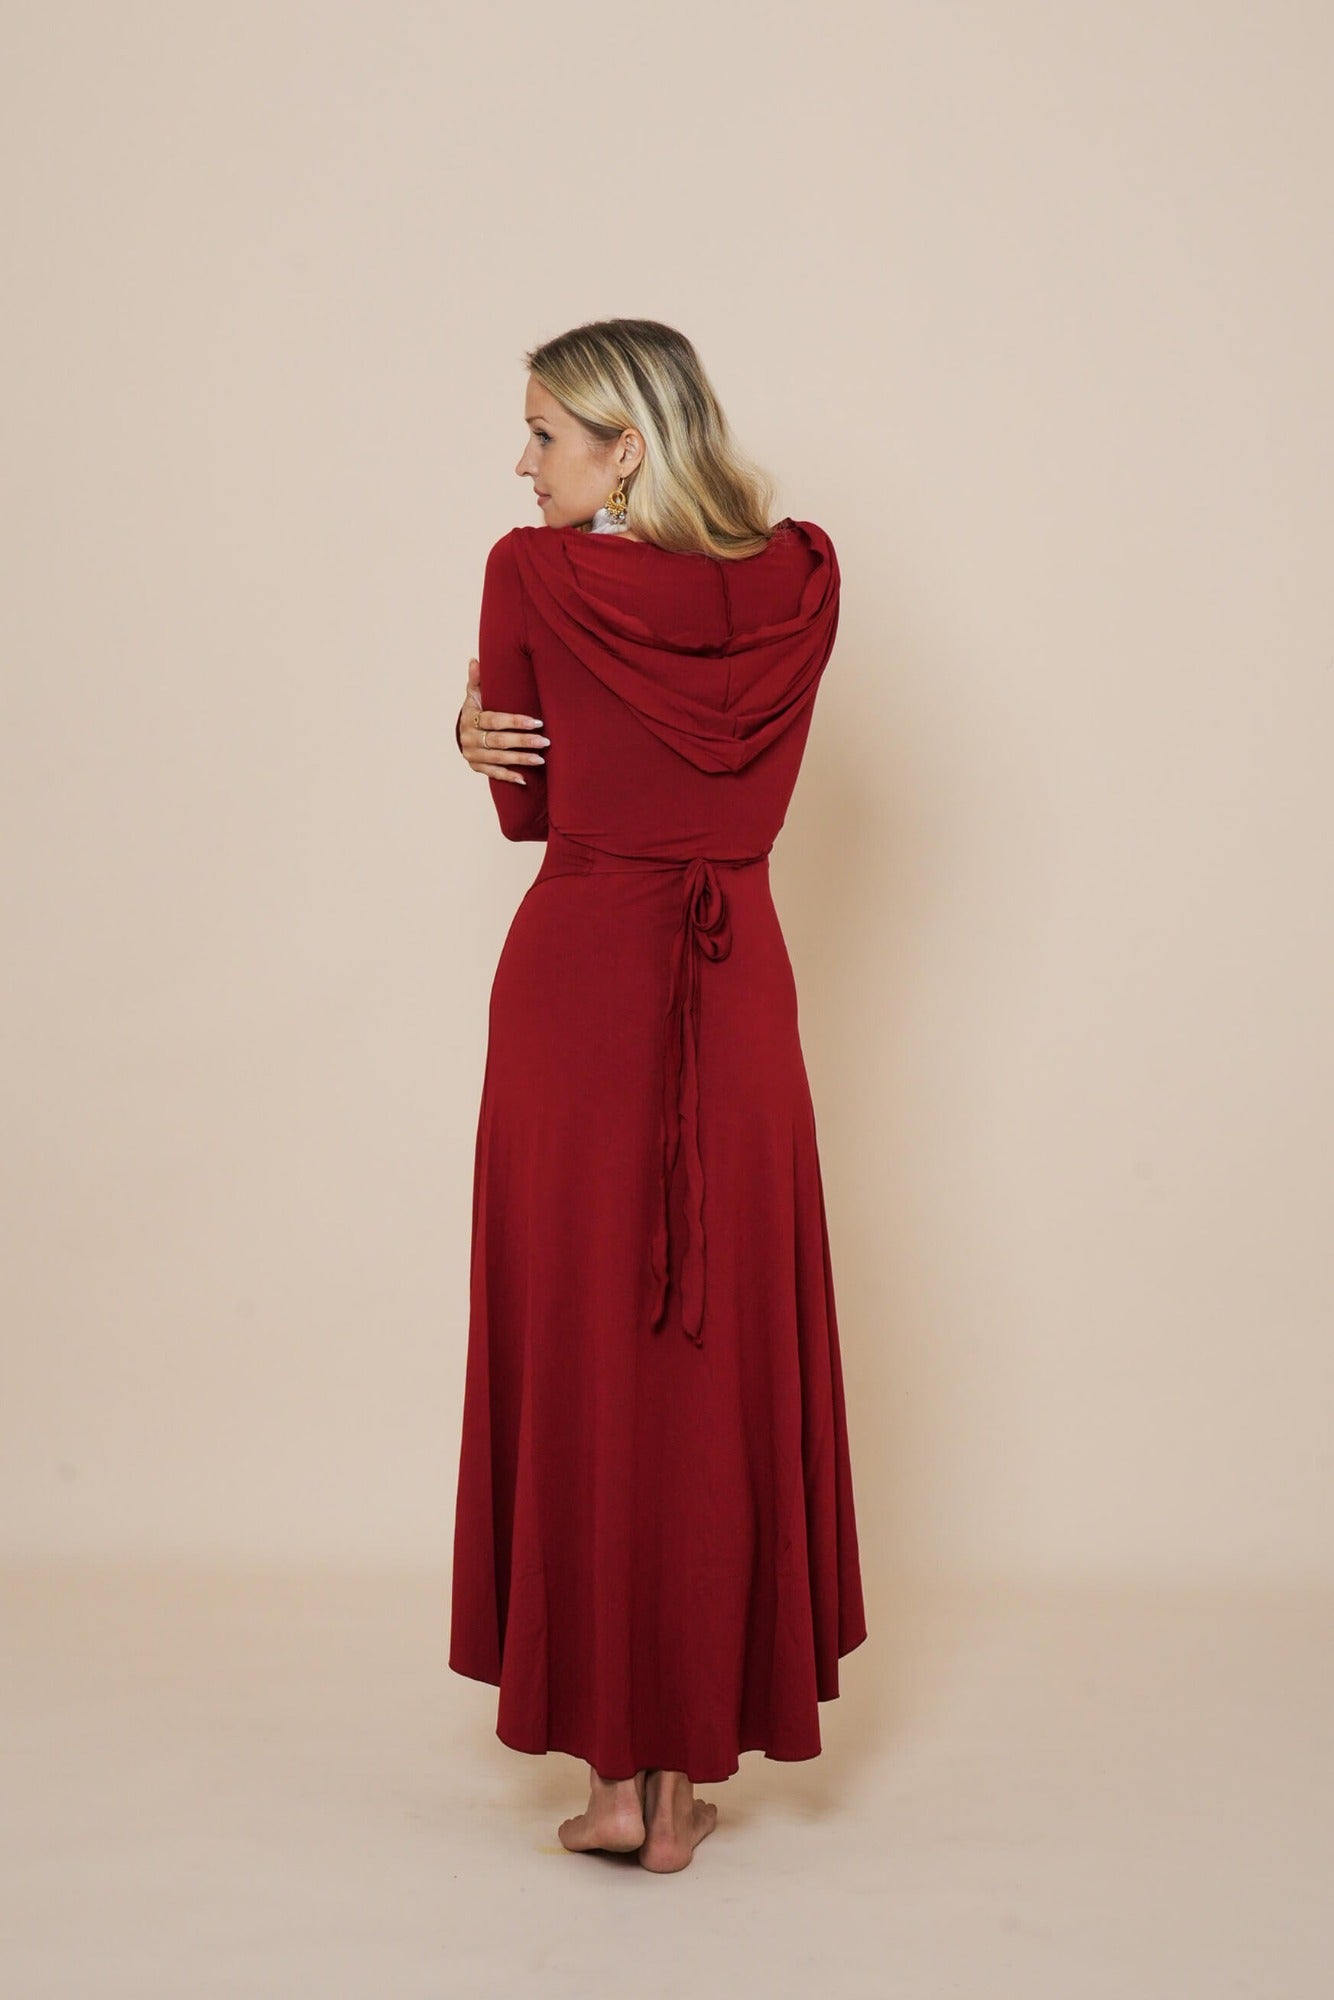 Beautiful long wrap around dress with hood in color scarlet red.